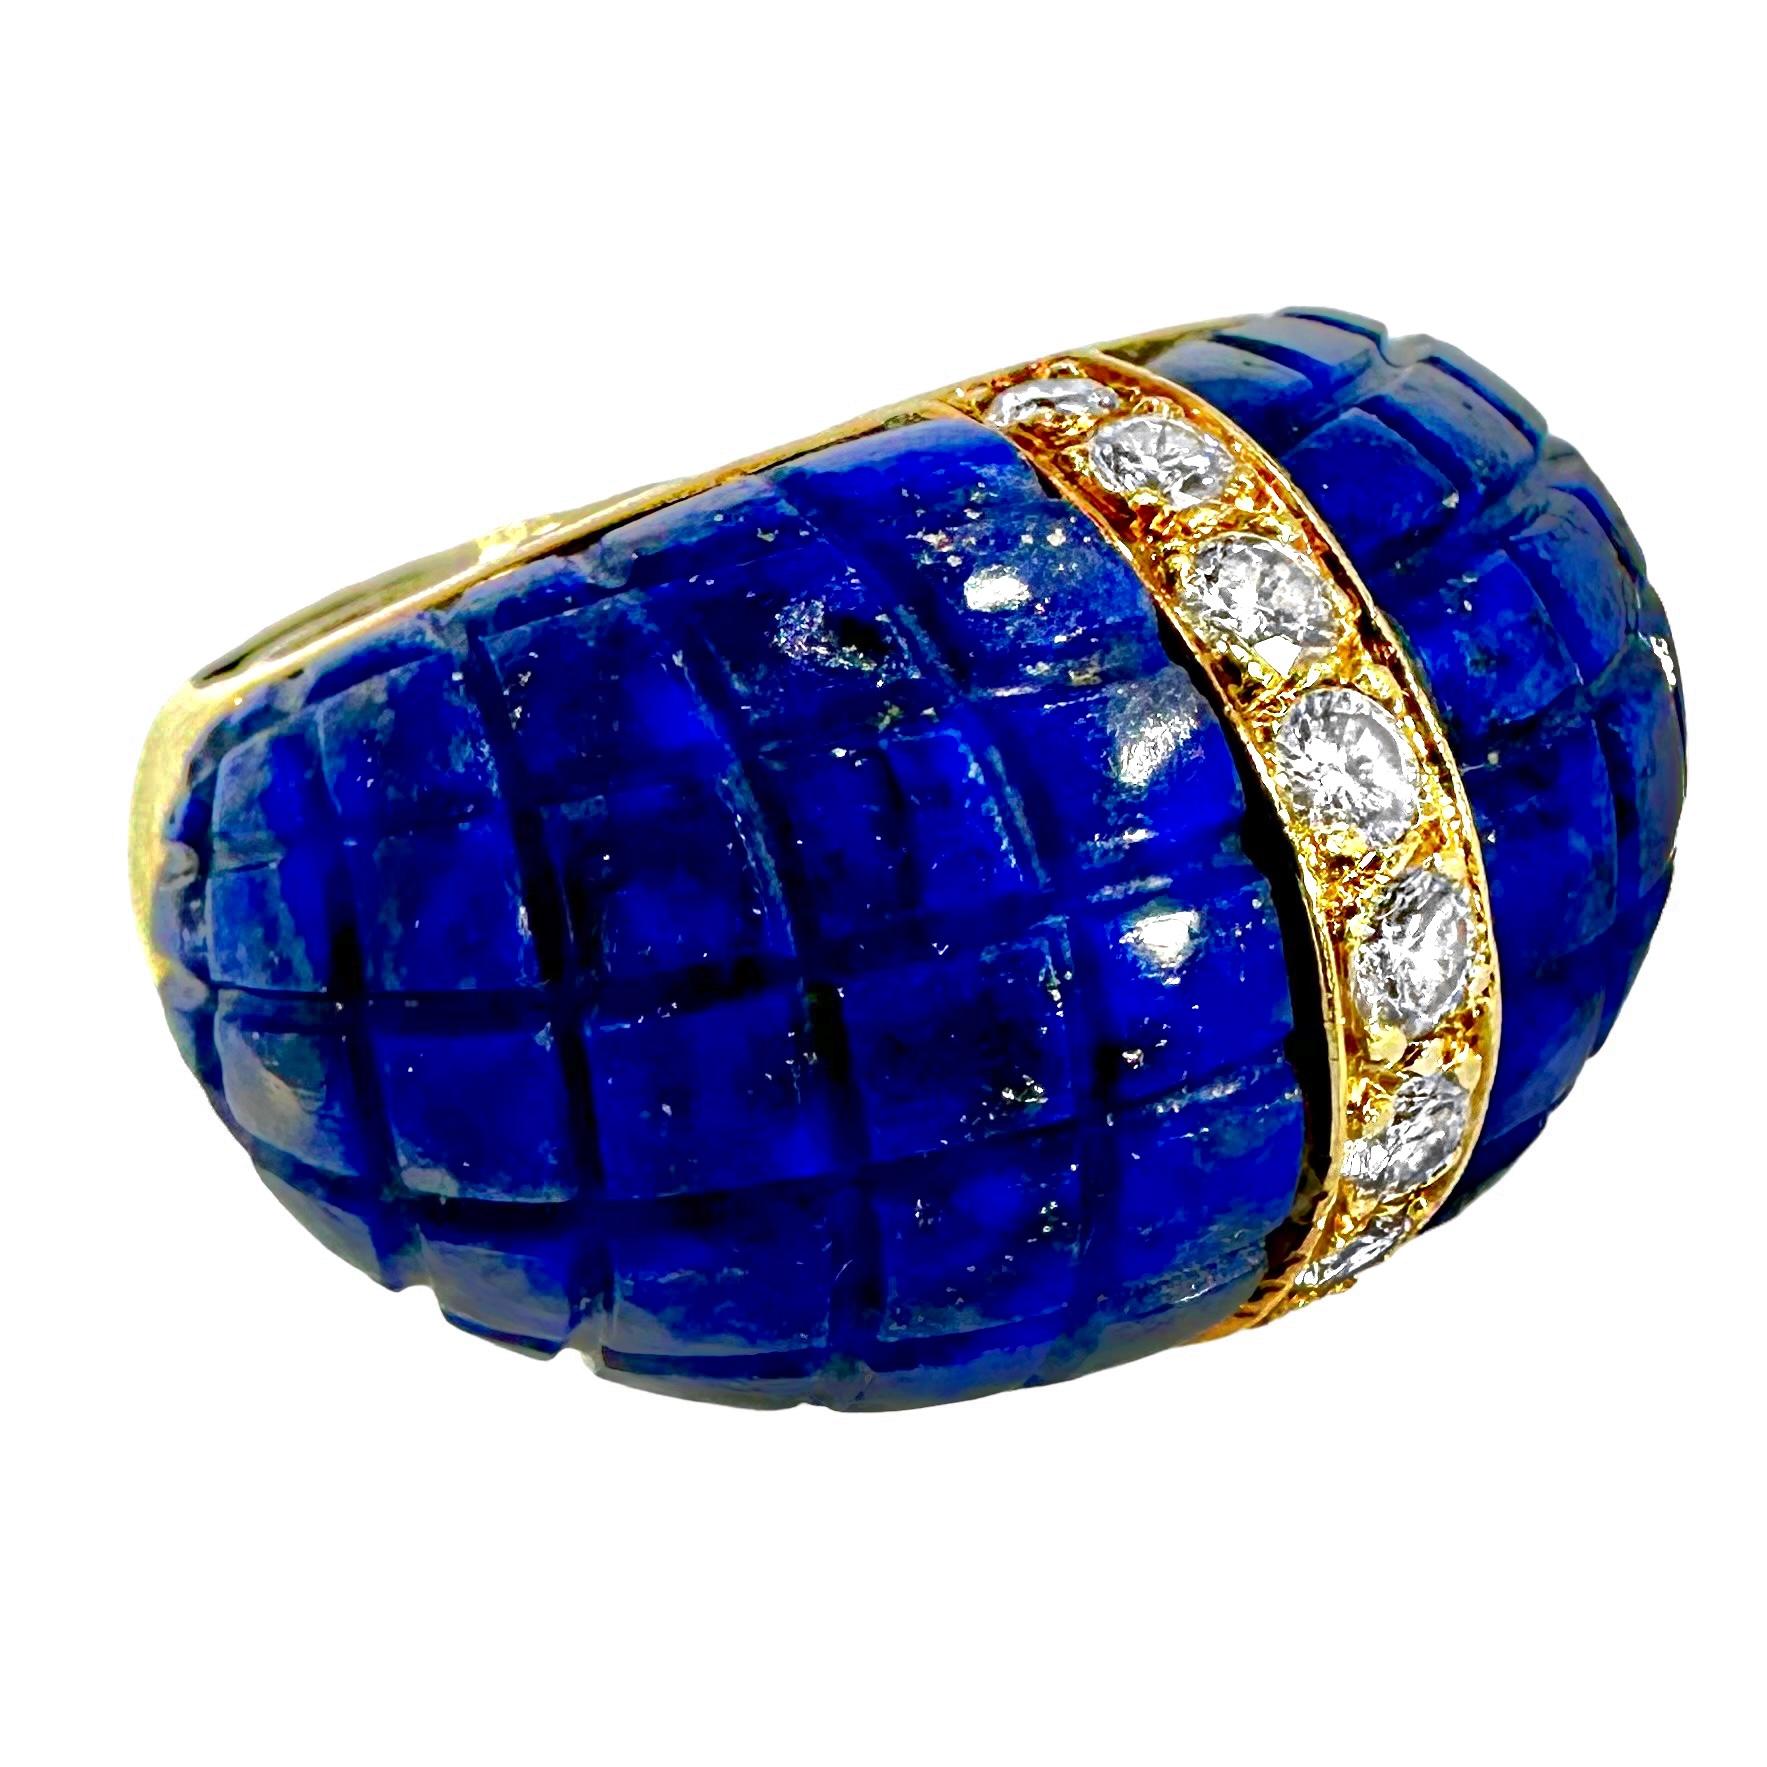 This very stylish 18k yellow gold, Lapis-Lazuli and diamond vintage Italian creation is comprised of a center line of nine round brilliant cut diamonds, flanked on both sides by large bombe panels of rich blue Lapis-Lazuli with flecks of white and